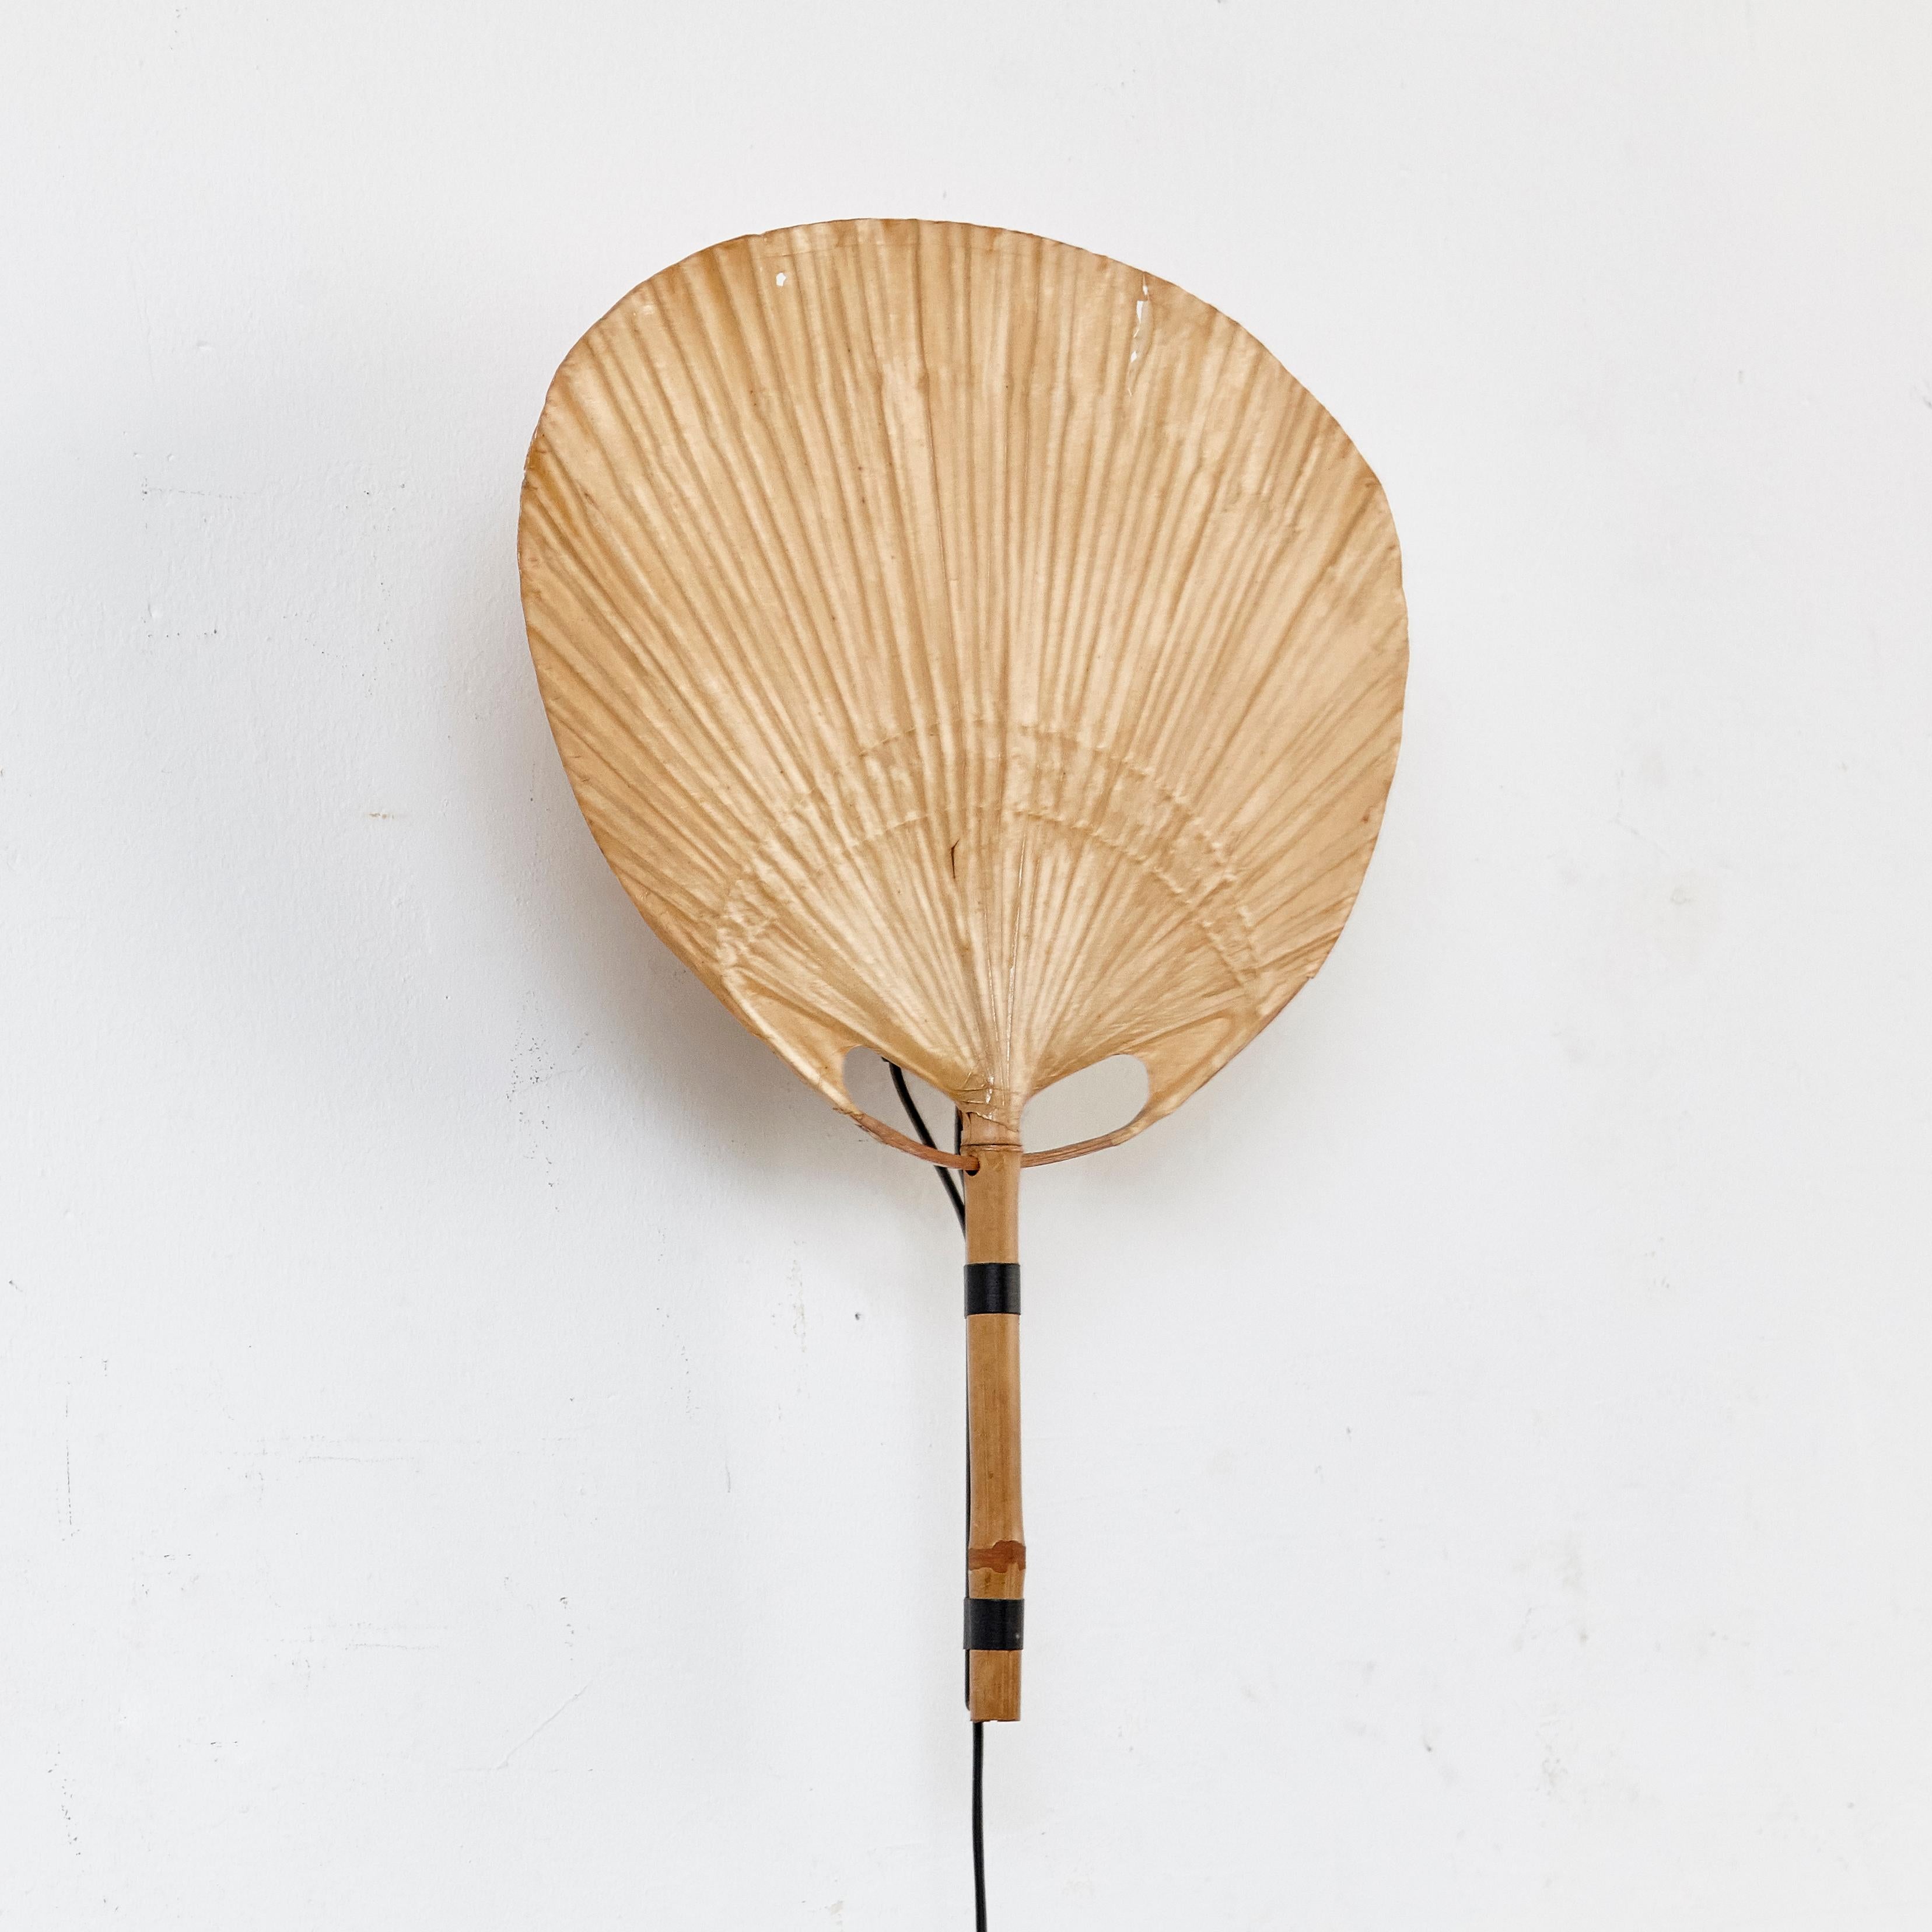 Appliqué 'Uchiwa III' created by Ingo Maurer for Design M.

In original condition, with minor wear consistent with age and use some small scratches as we show on the images, preserving a beautiful patina.

Bamboo, rice paper and black lacquered